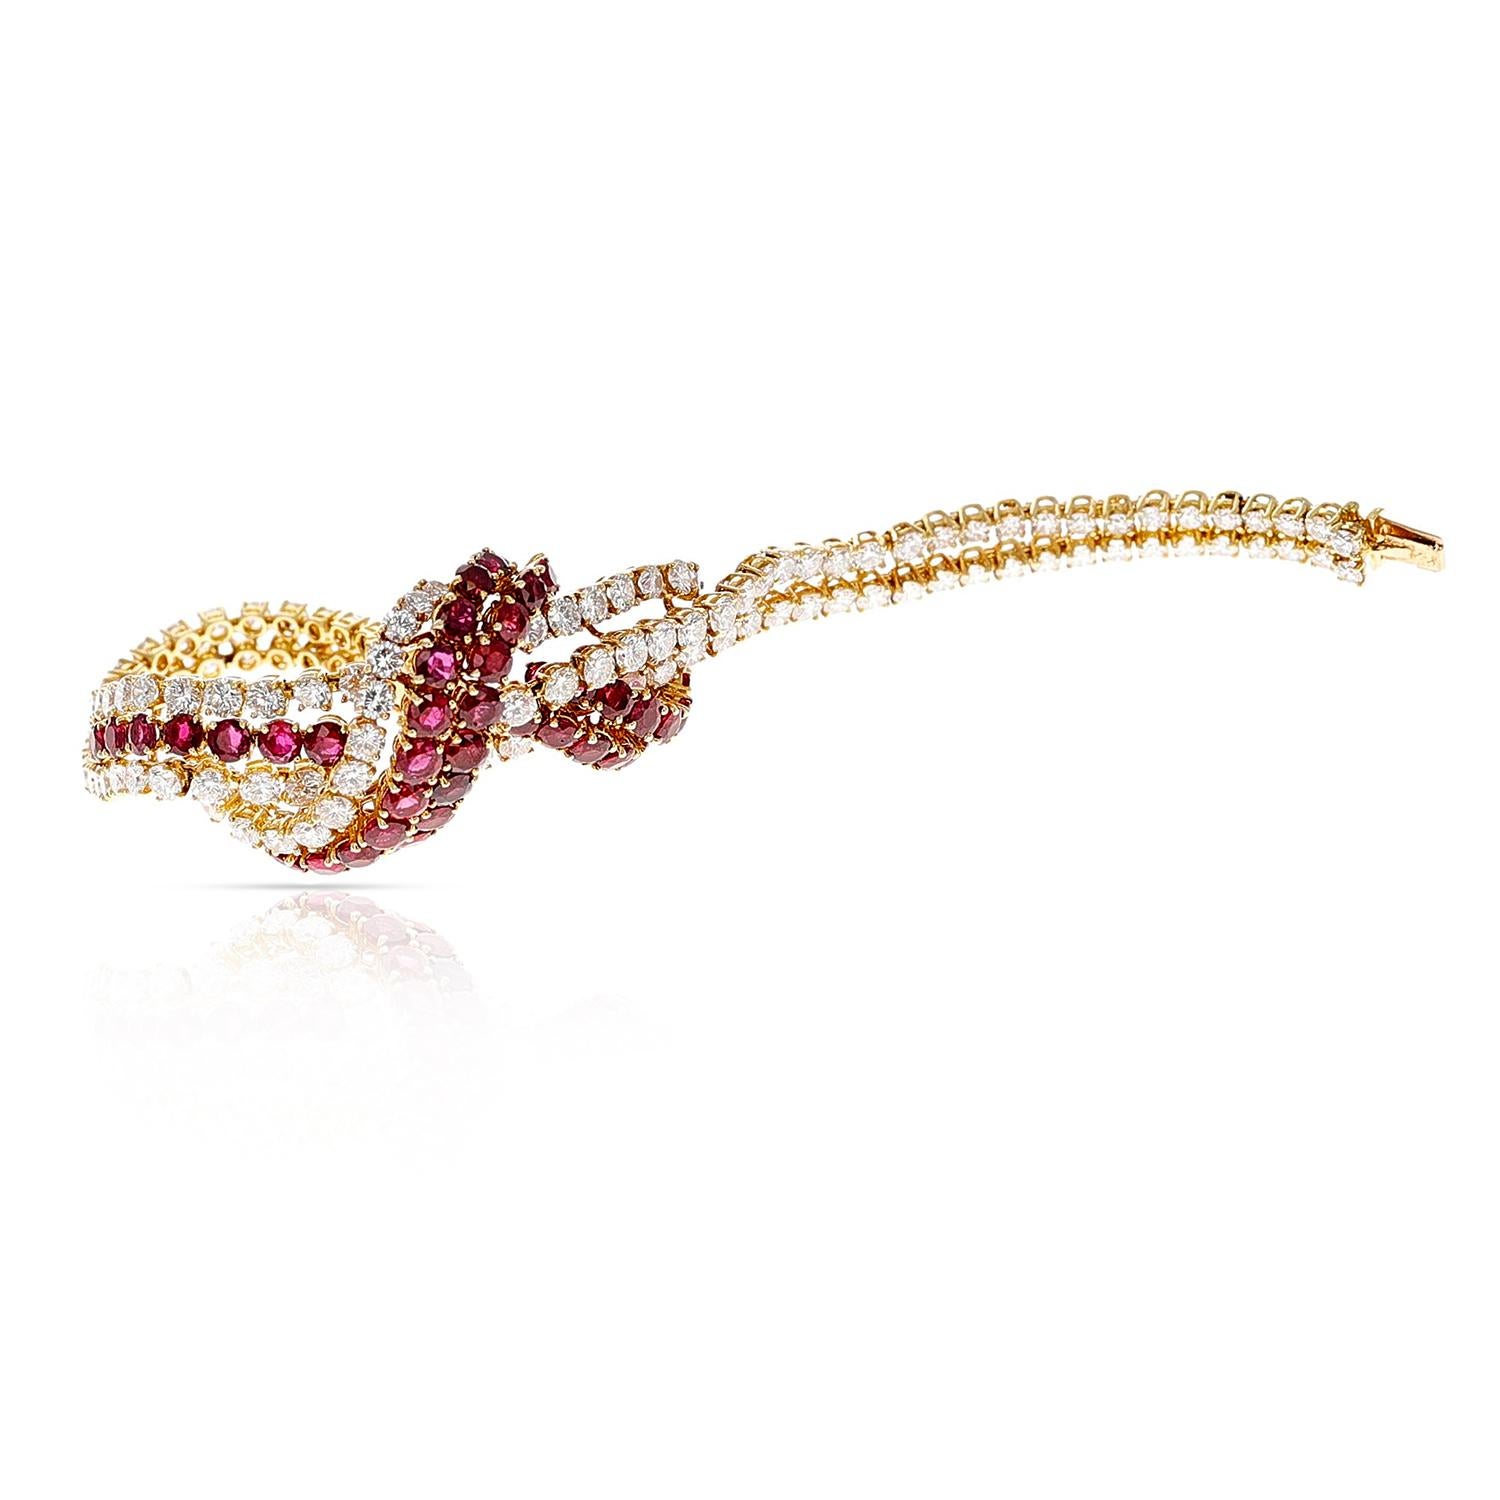 Round Cut 1970s French Ruby and Diamond Bracelet by Vassort and Gerard, 18K Yellow Gold